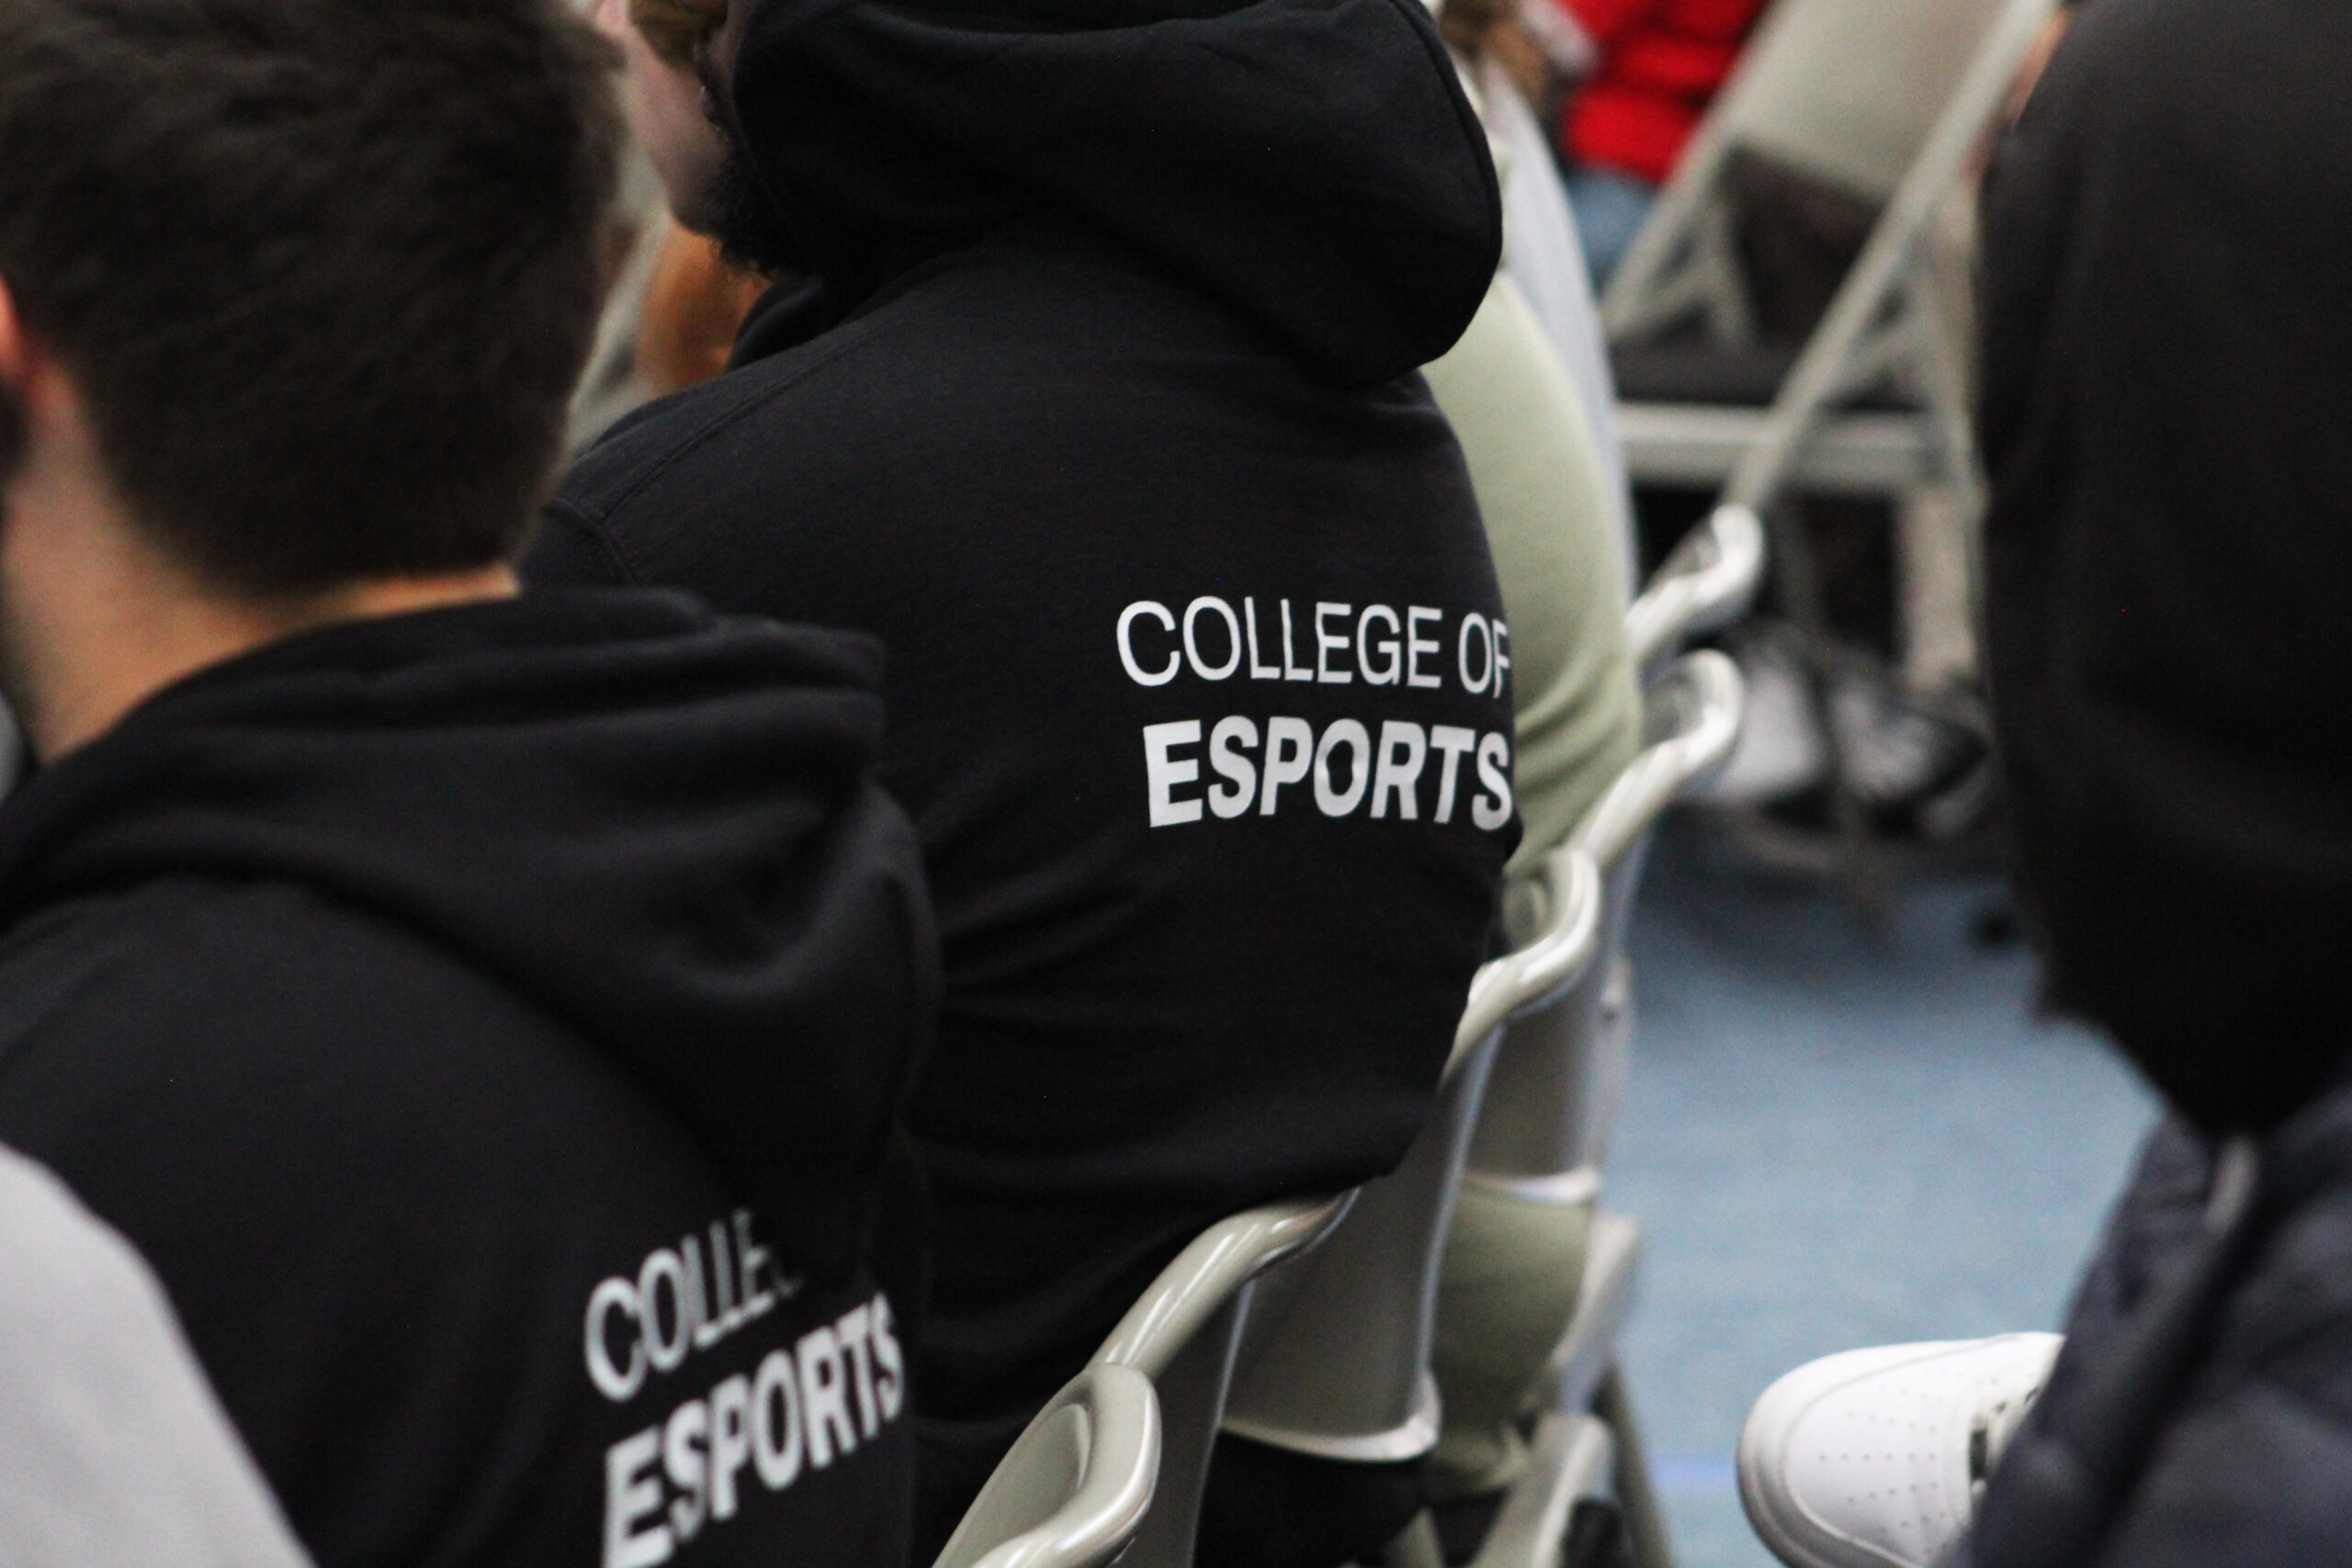 College of Esports Image of Back of Branded Hoodie